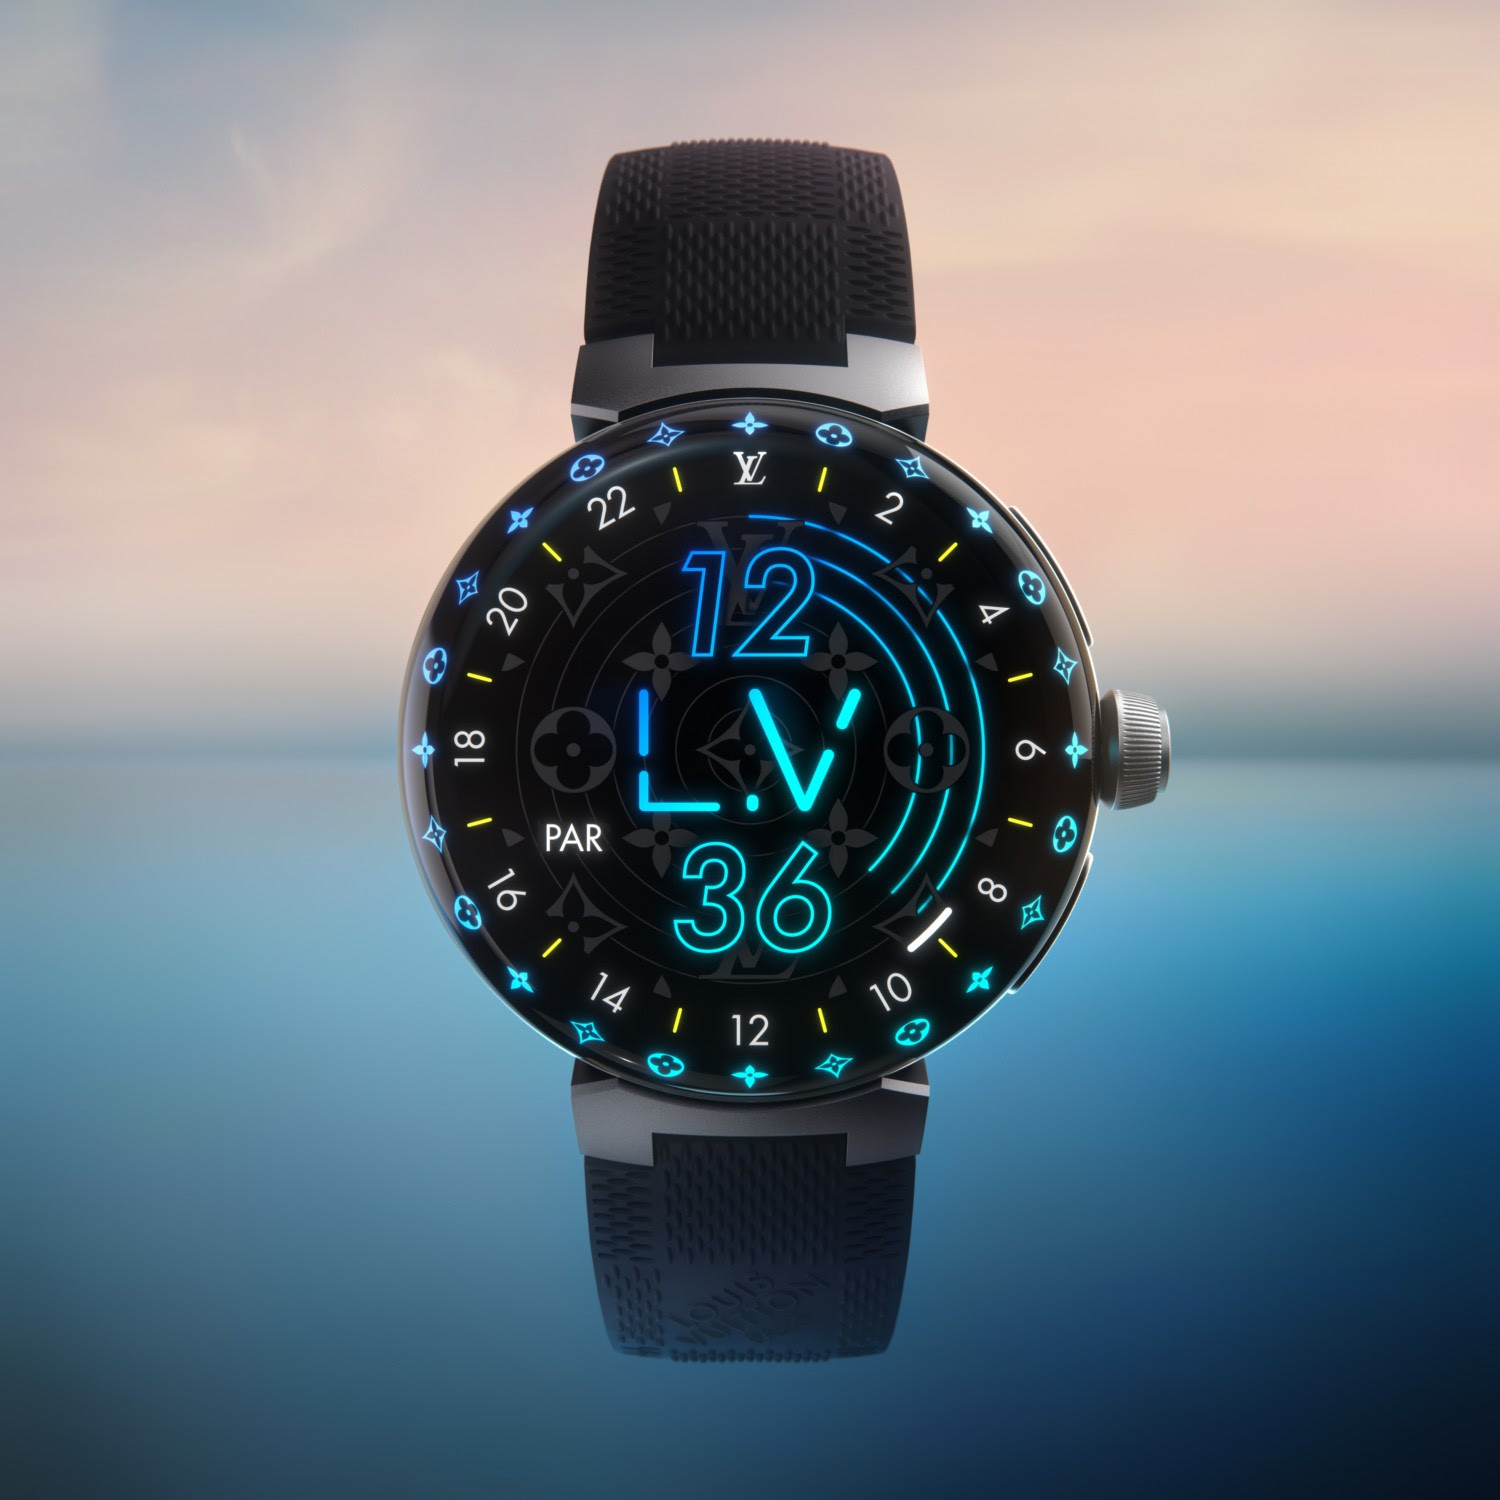 Louis Vuitton Pop-Up Celebrating 20 Years Of The Tambour Watch